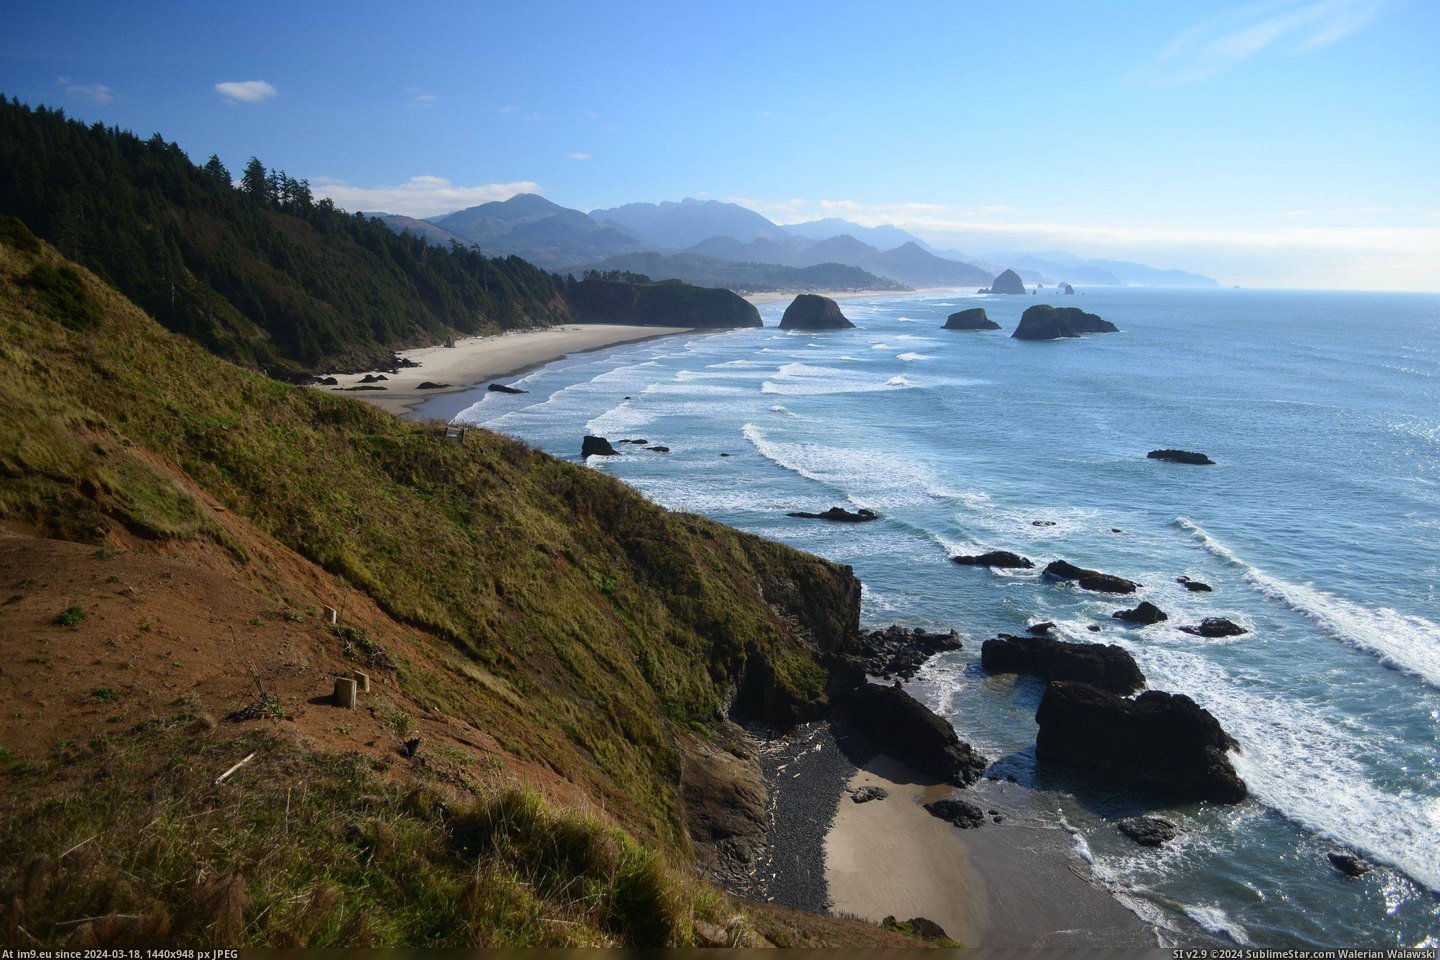 #Beach #Cannon #Point #2956x1958 #Ecola #Oregon #Coast #Northern [Earthporn] Cannon Beach, taken from Ecola Point on Oregon's northern coast. (2956x1958)[OC] Pic. (Изображение из альбом My r/EARTHPORN favs))